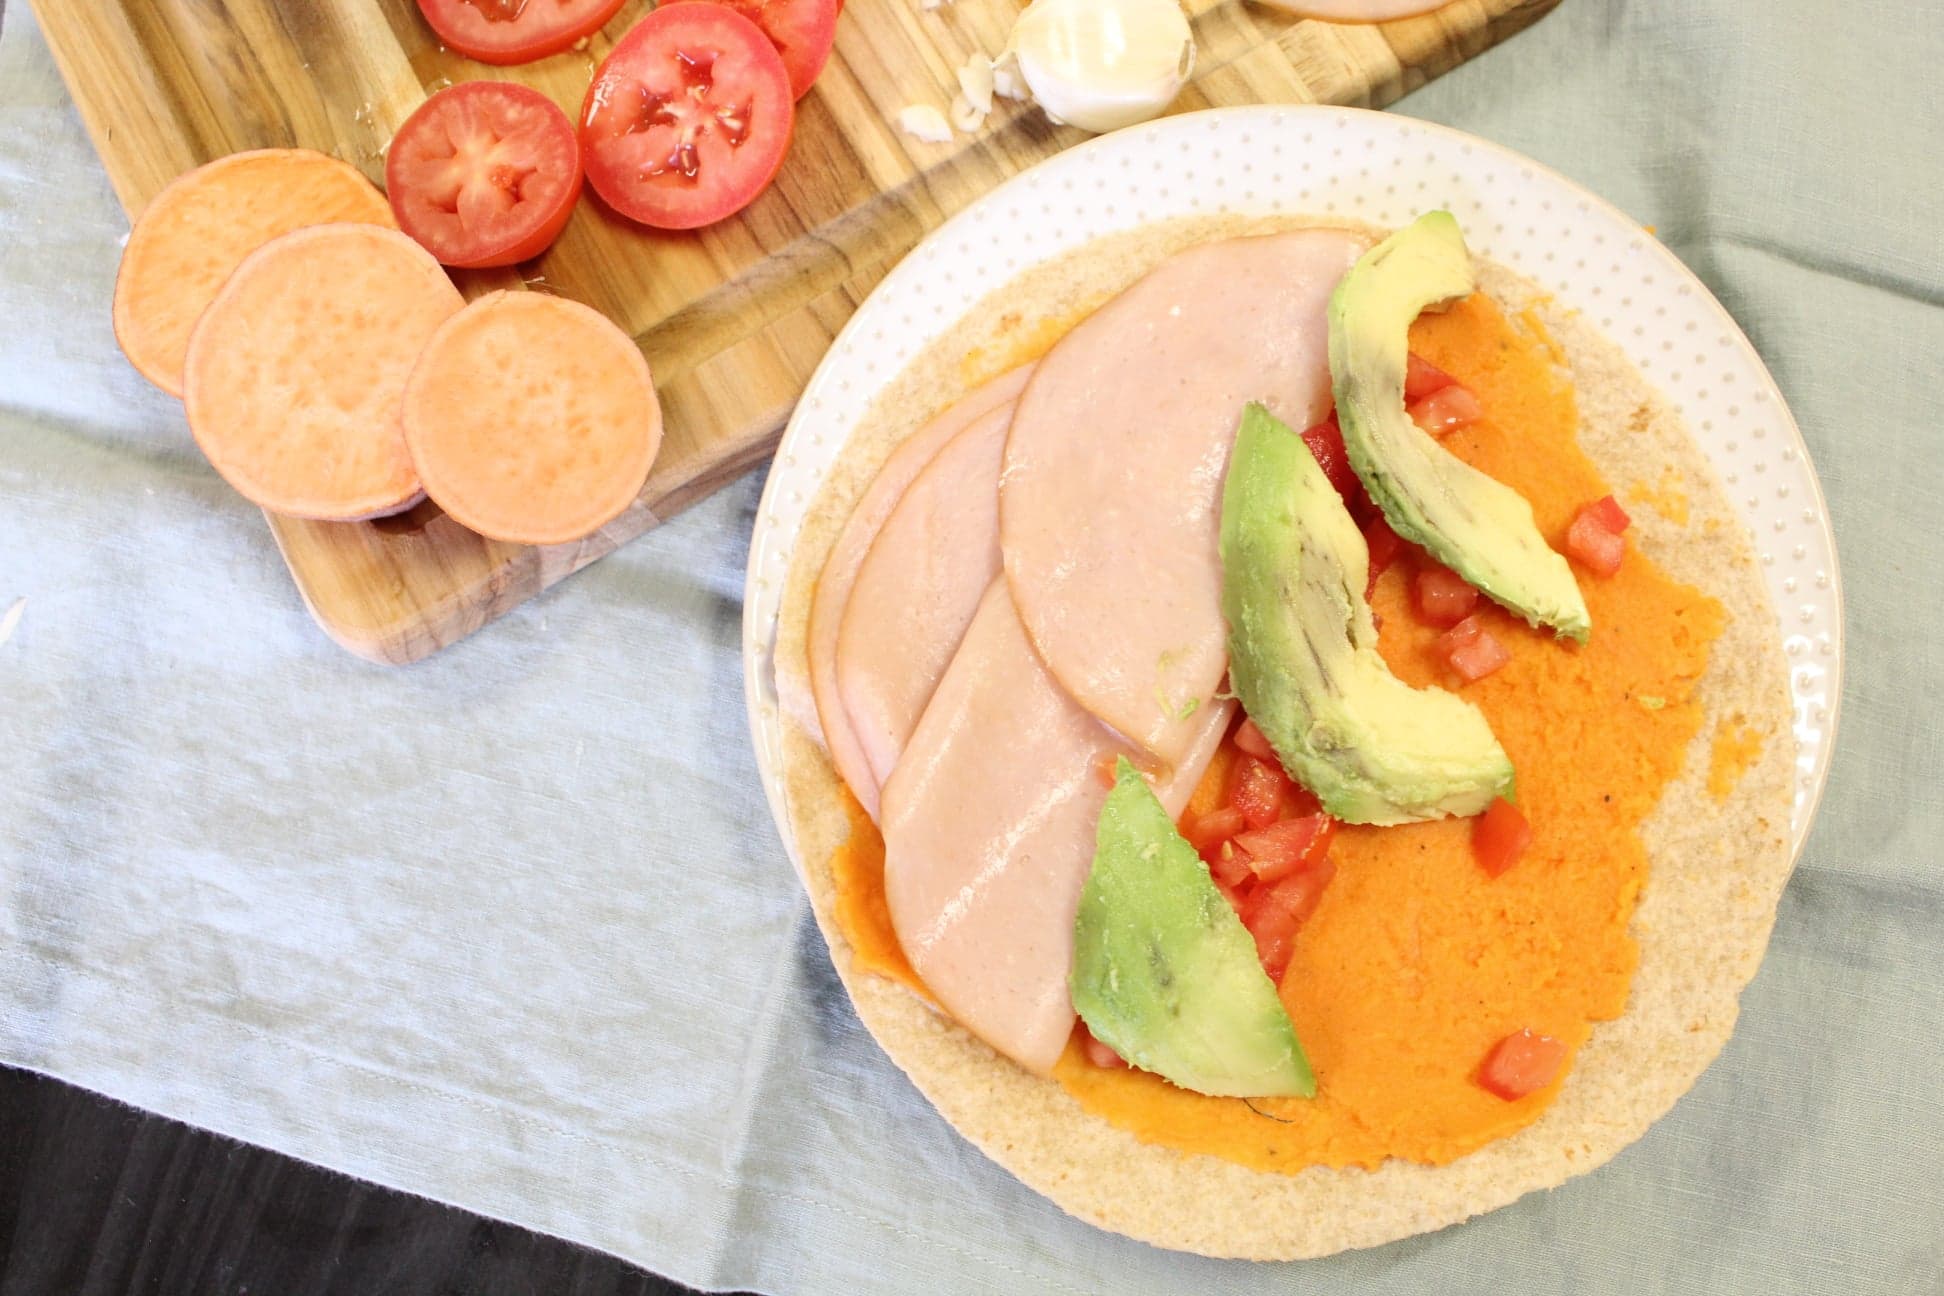 Sweet Potato wrap built with ingredients on cutting board